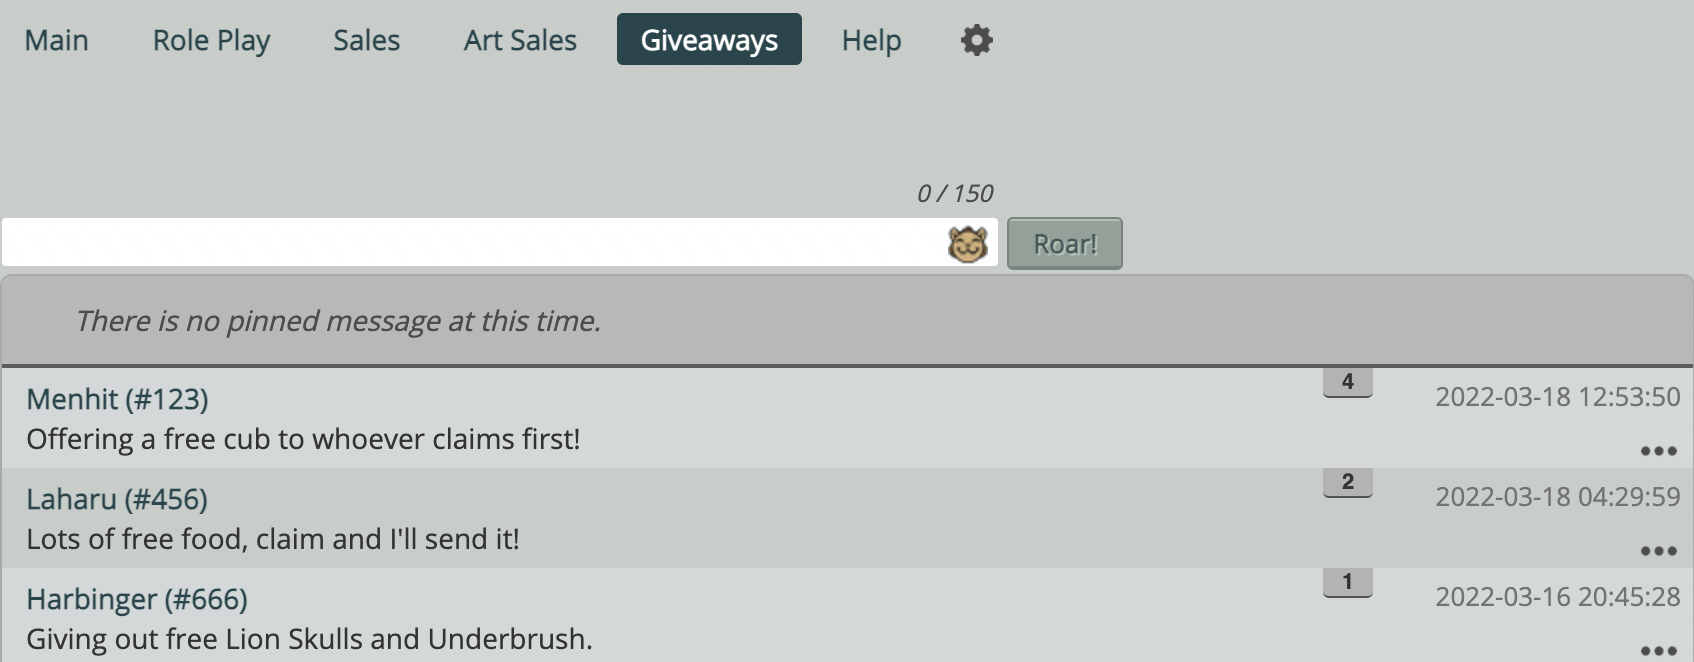 Screenshot of Giveaways Chat with the new number value that indicates a giveaway has been claimed.